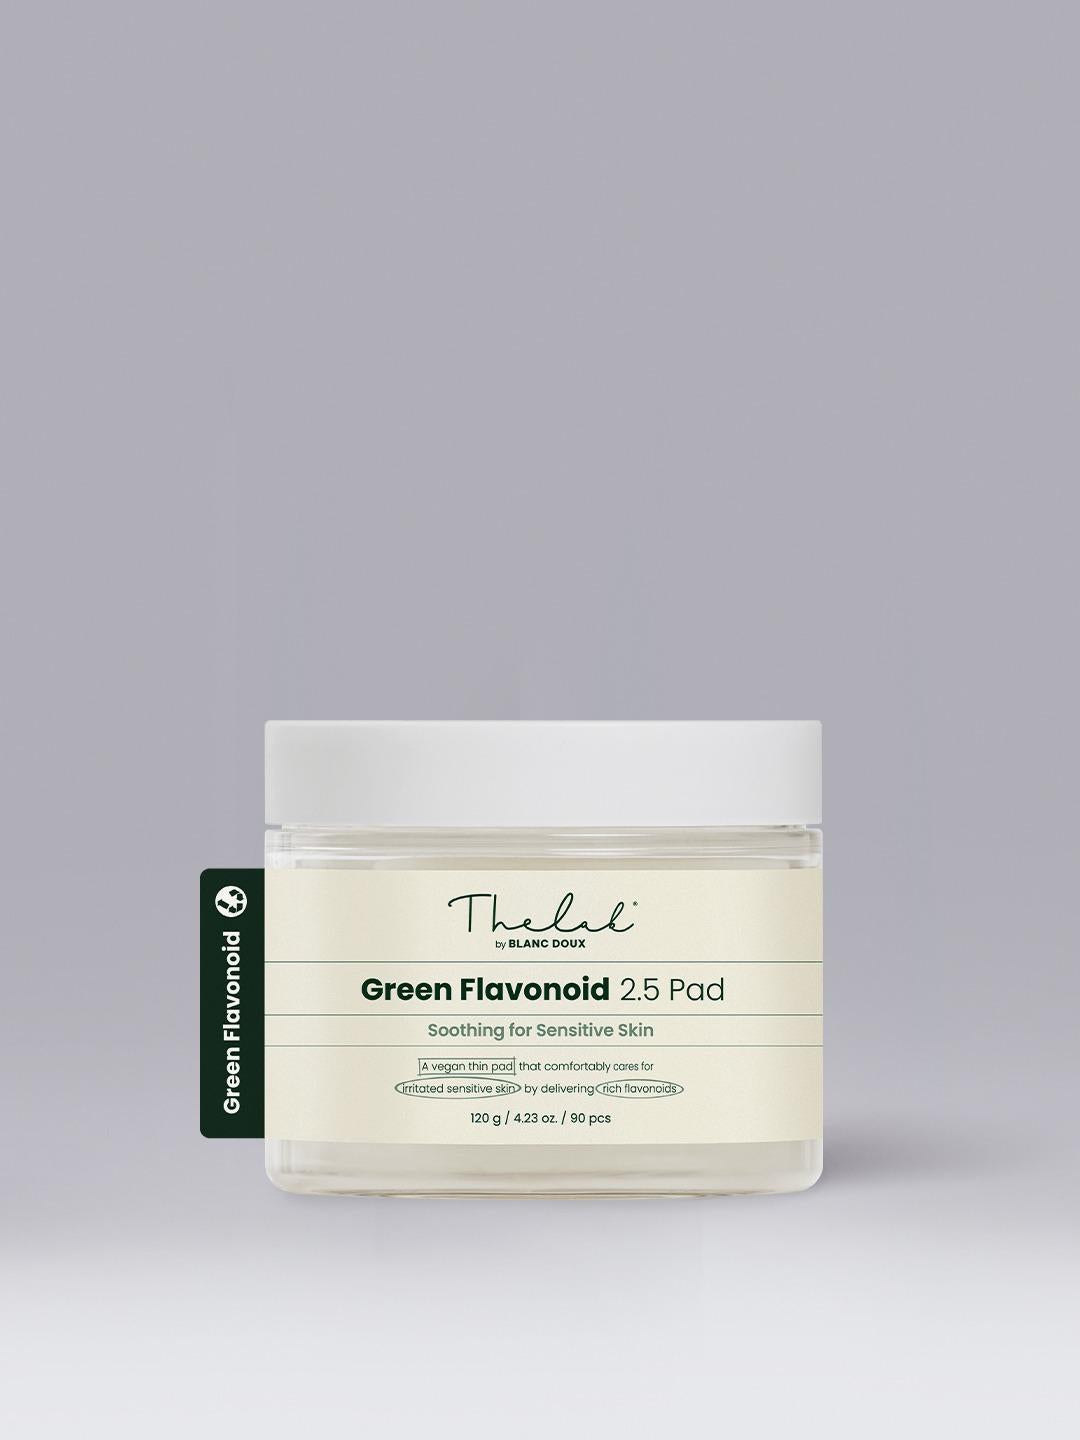 [THE LAB By BLANC DOUX] Green Flavonoid 2.5 Pad 90 EA 120g